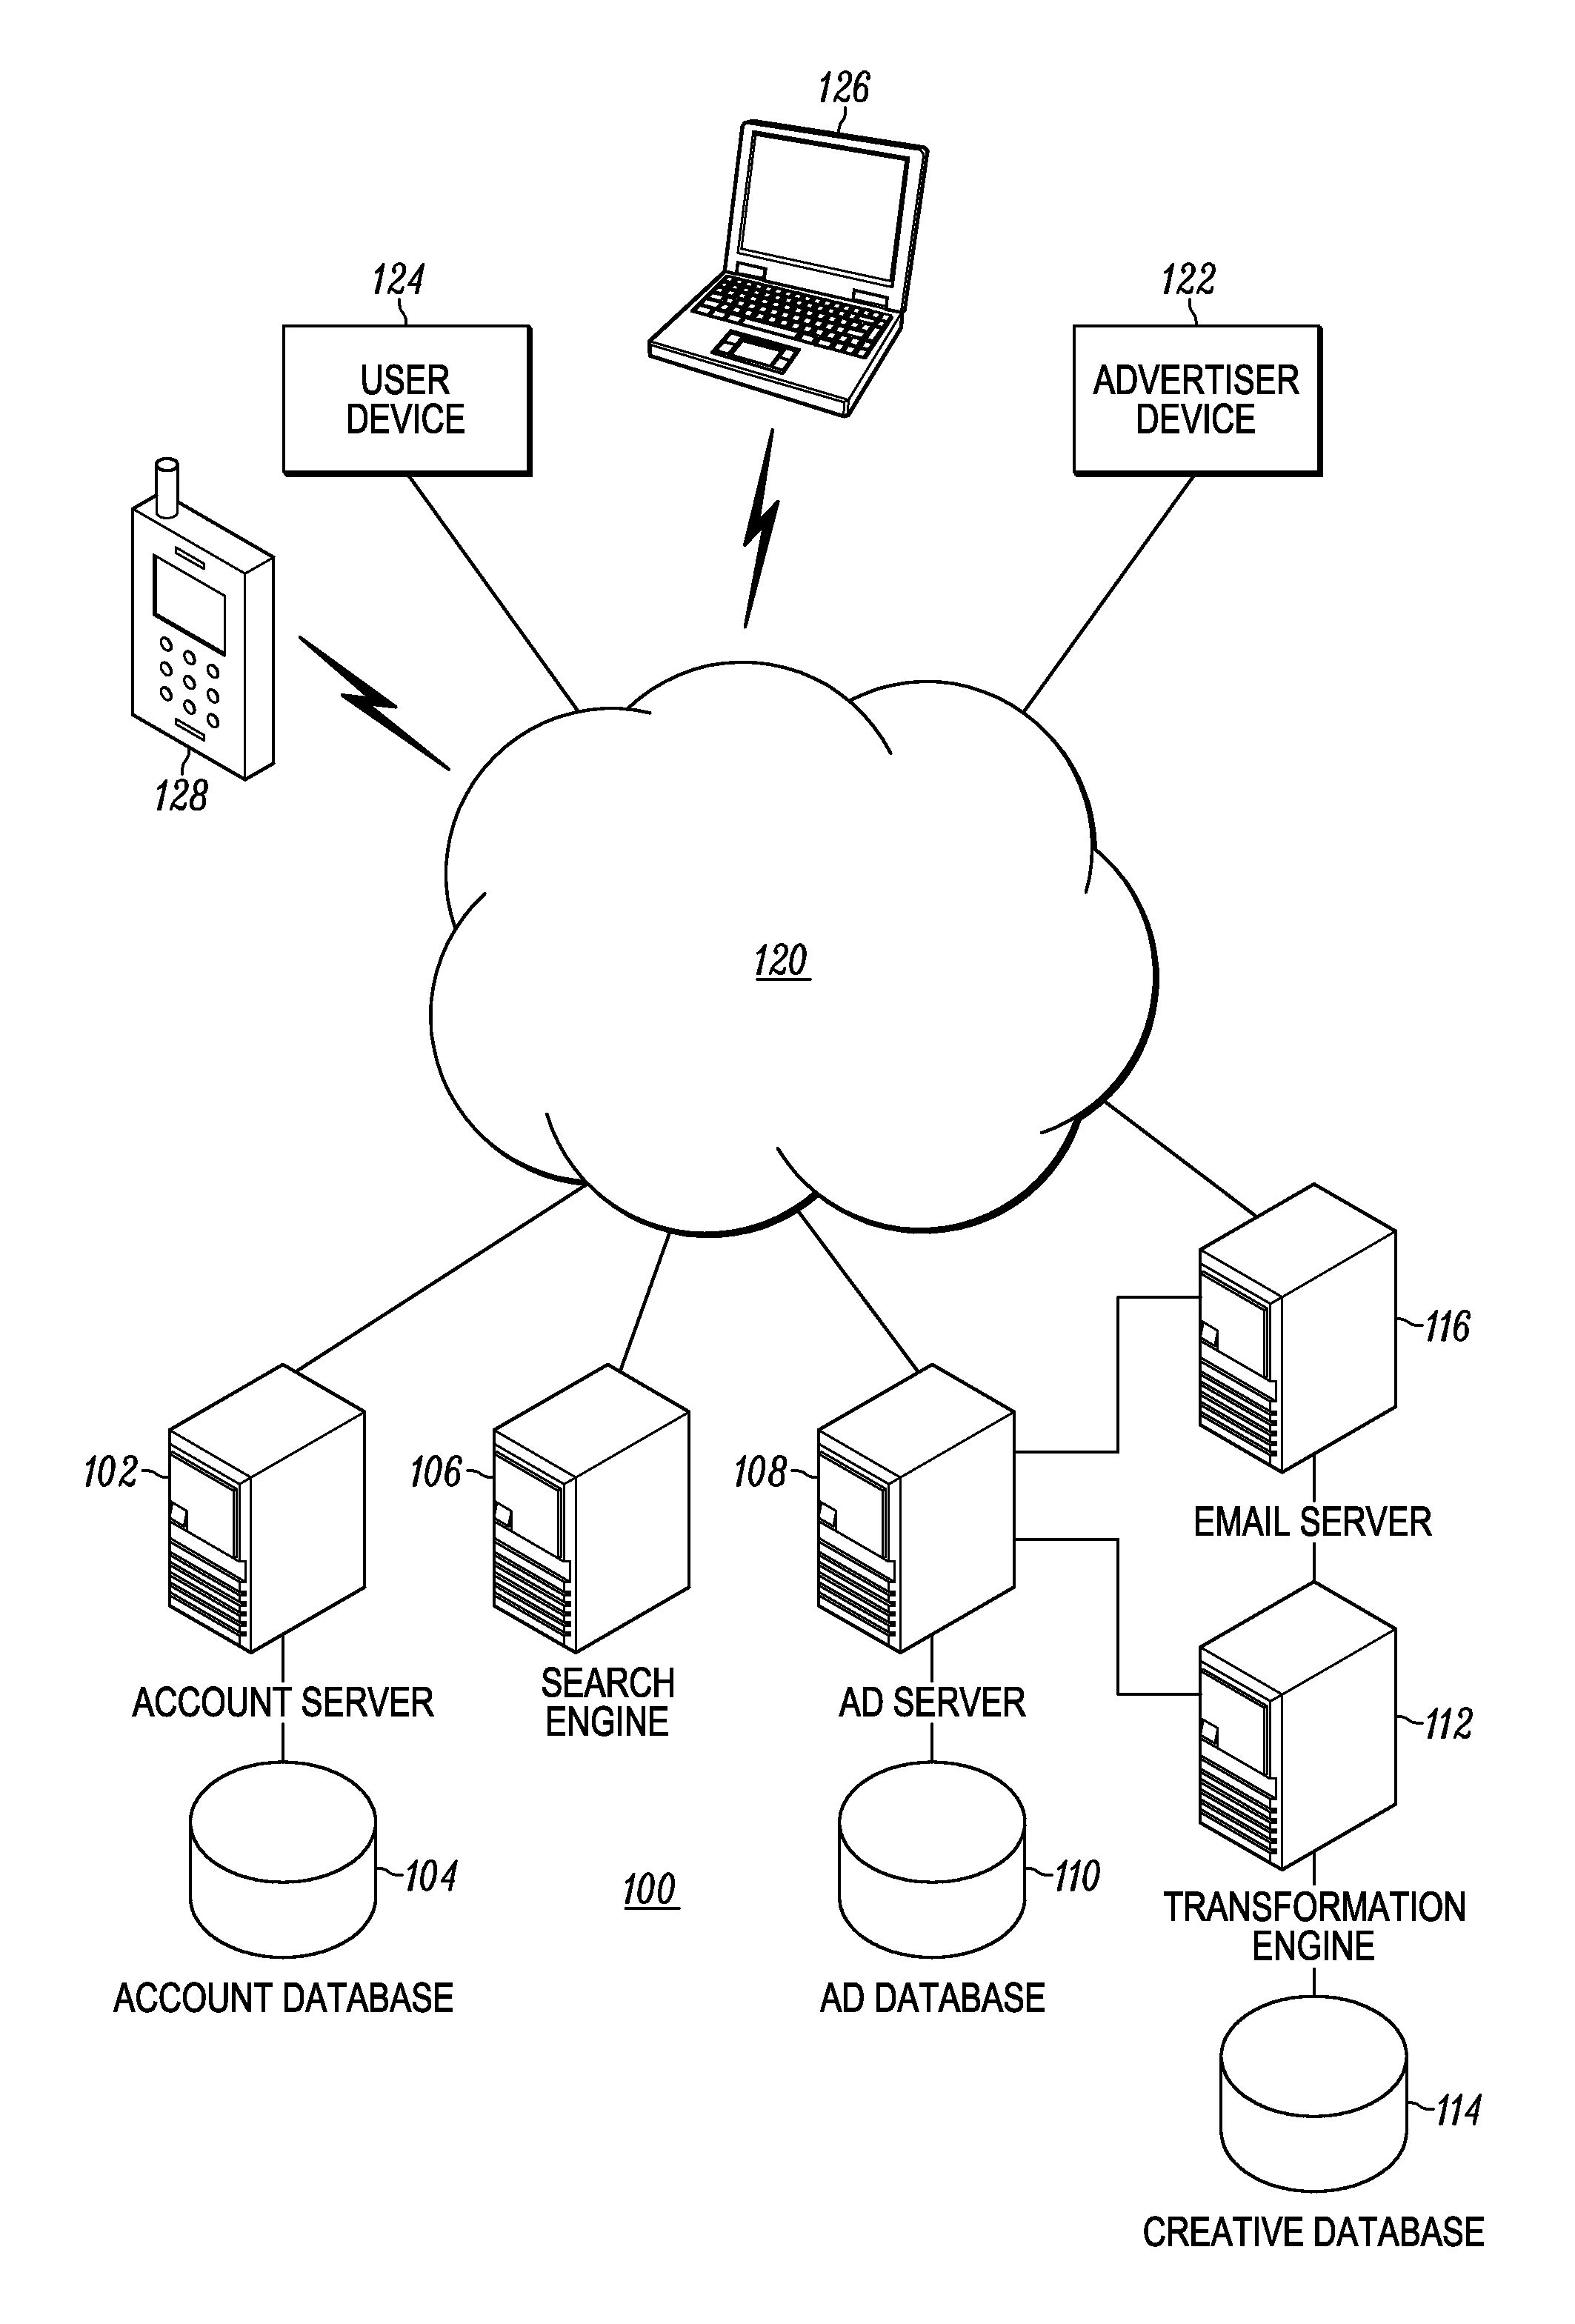 System and method for producing proposed online advertisements from pre-existing advertising creatives